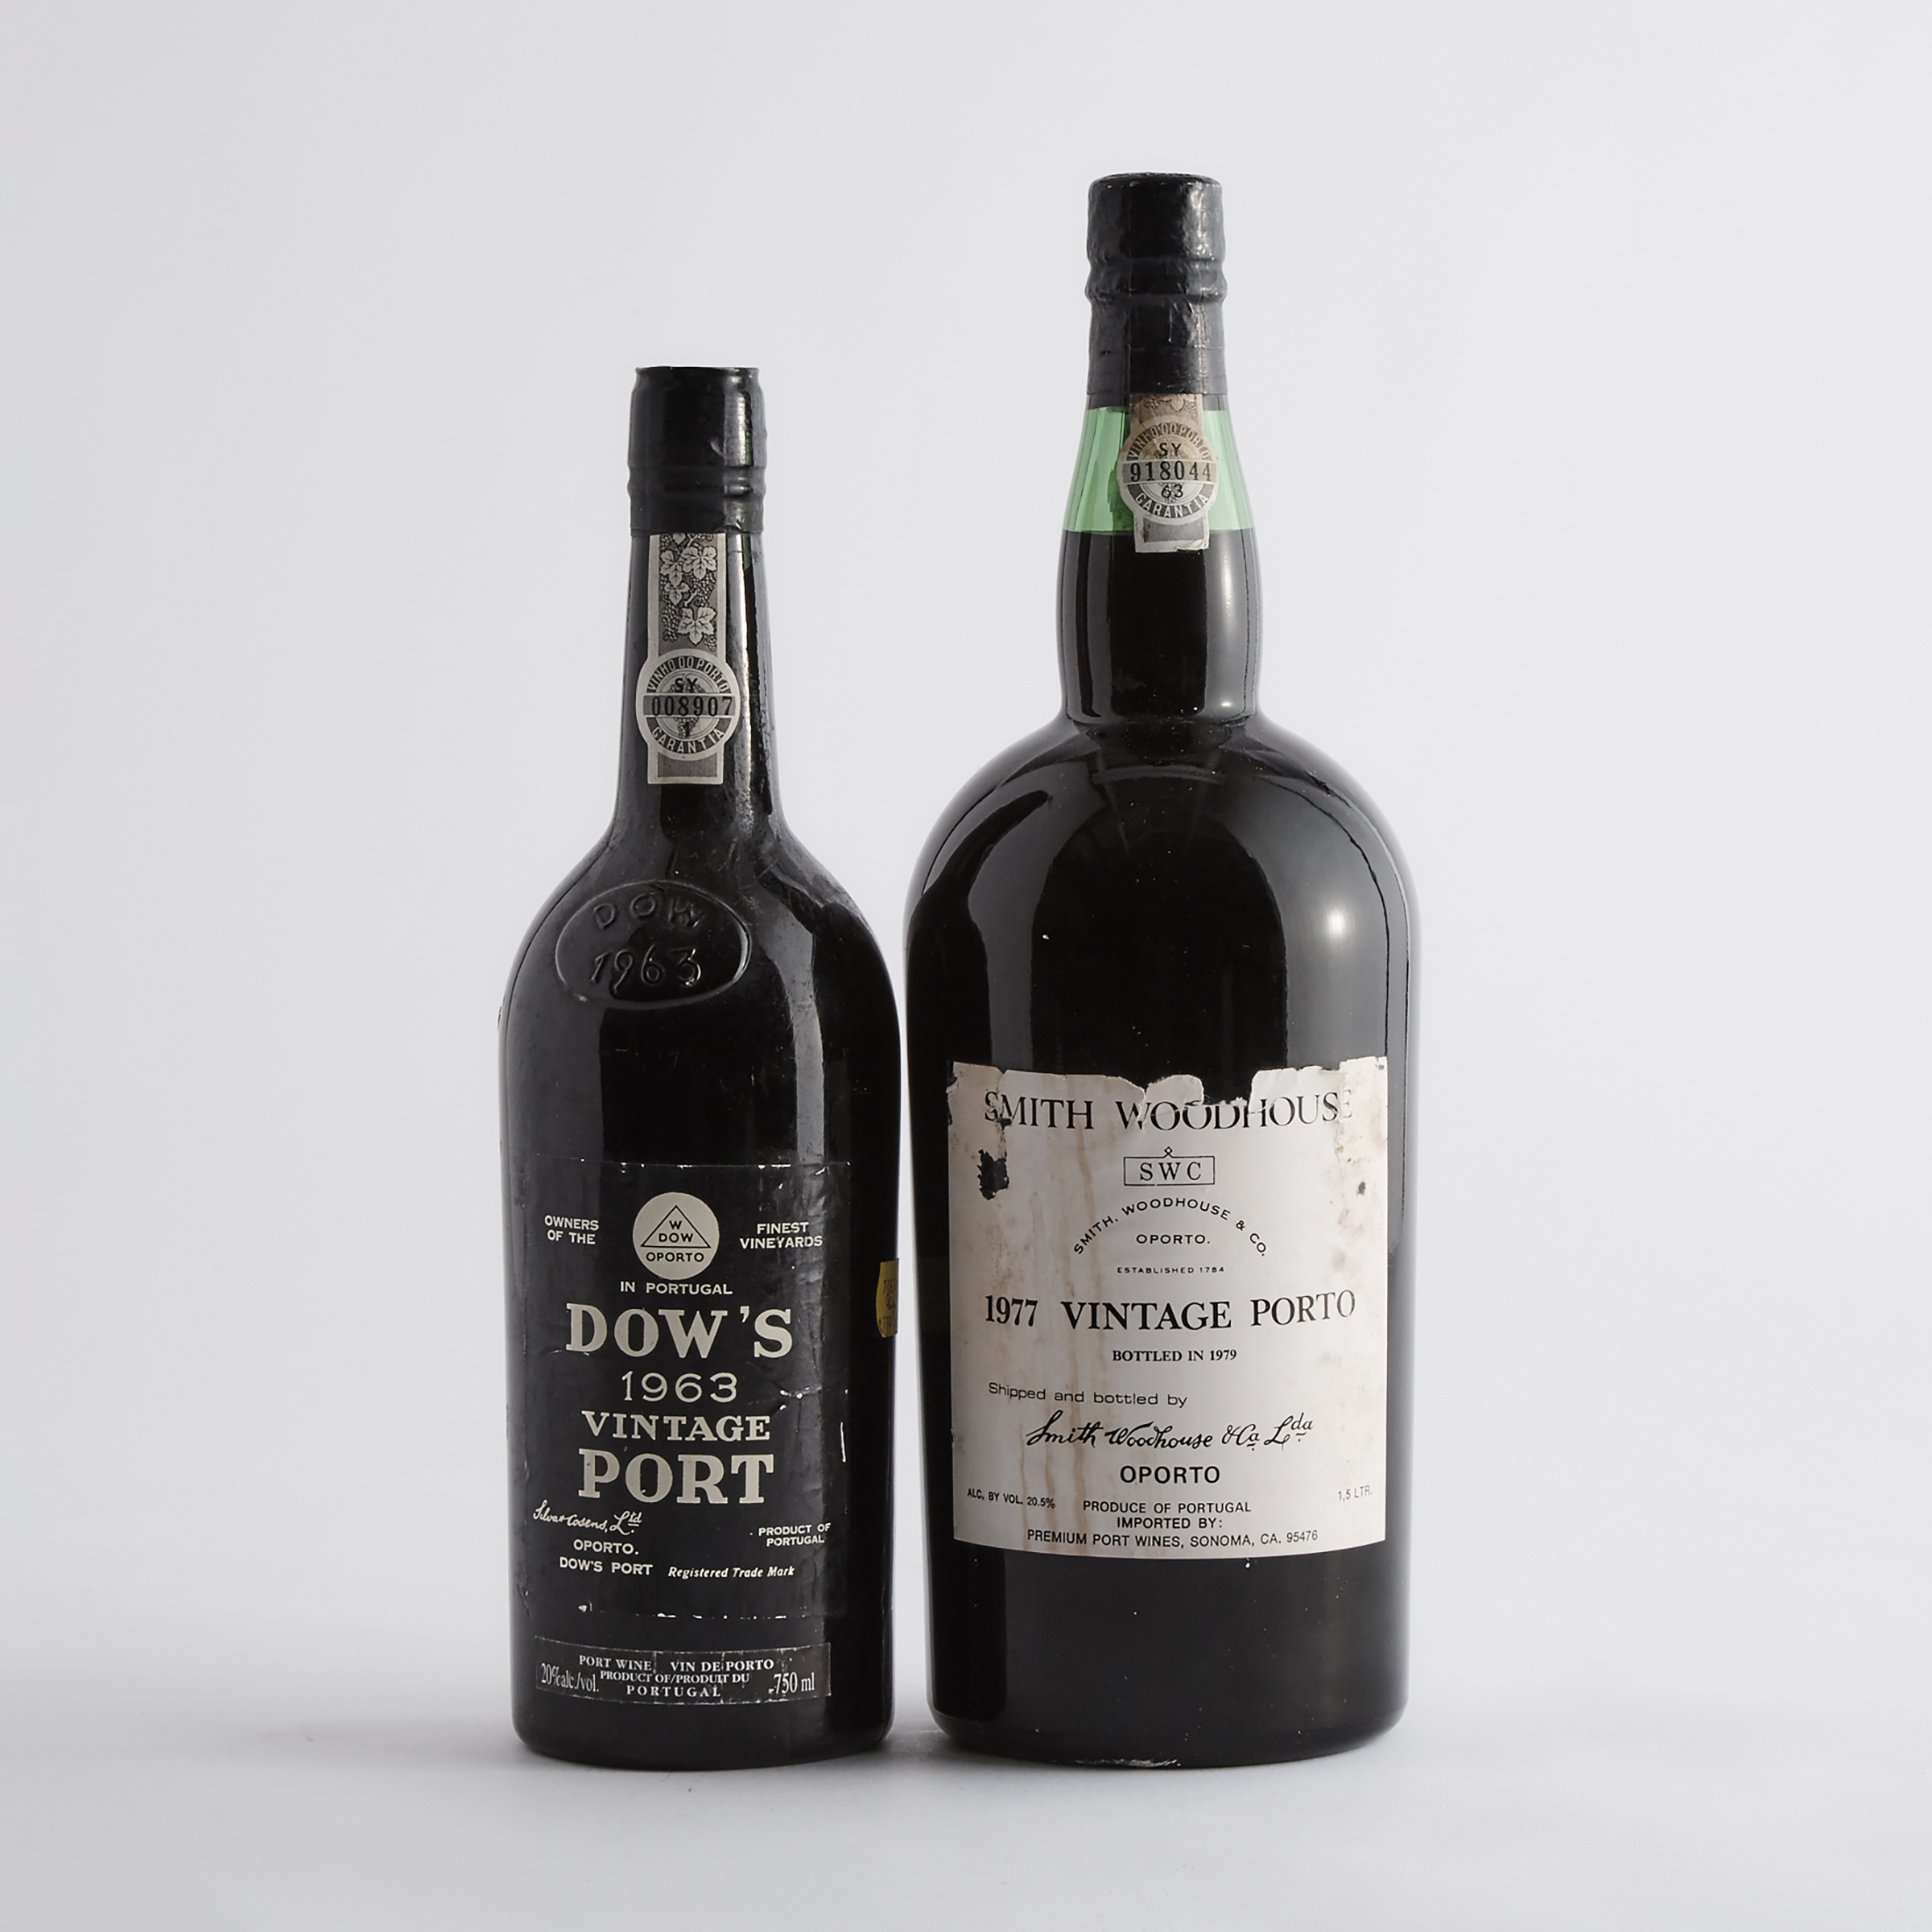 DOW'S VINTAGE PORT 1963 (1)
SMITH WOODHOUSE VINTAGE PORT 1977 (1 MAG.)